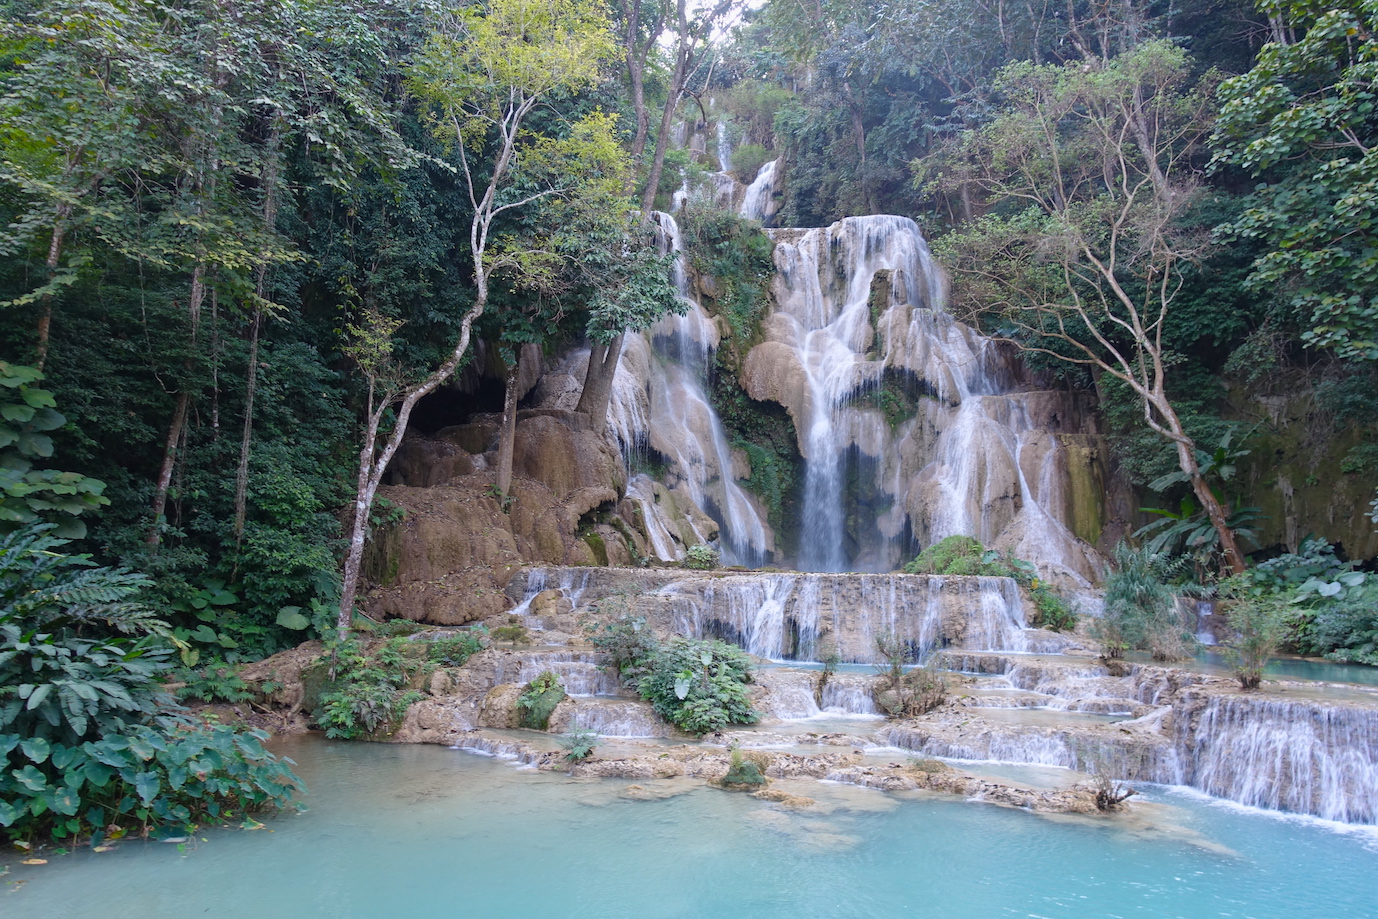 A view of the big waterfall in Kuang Si park